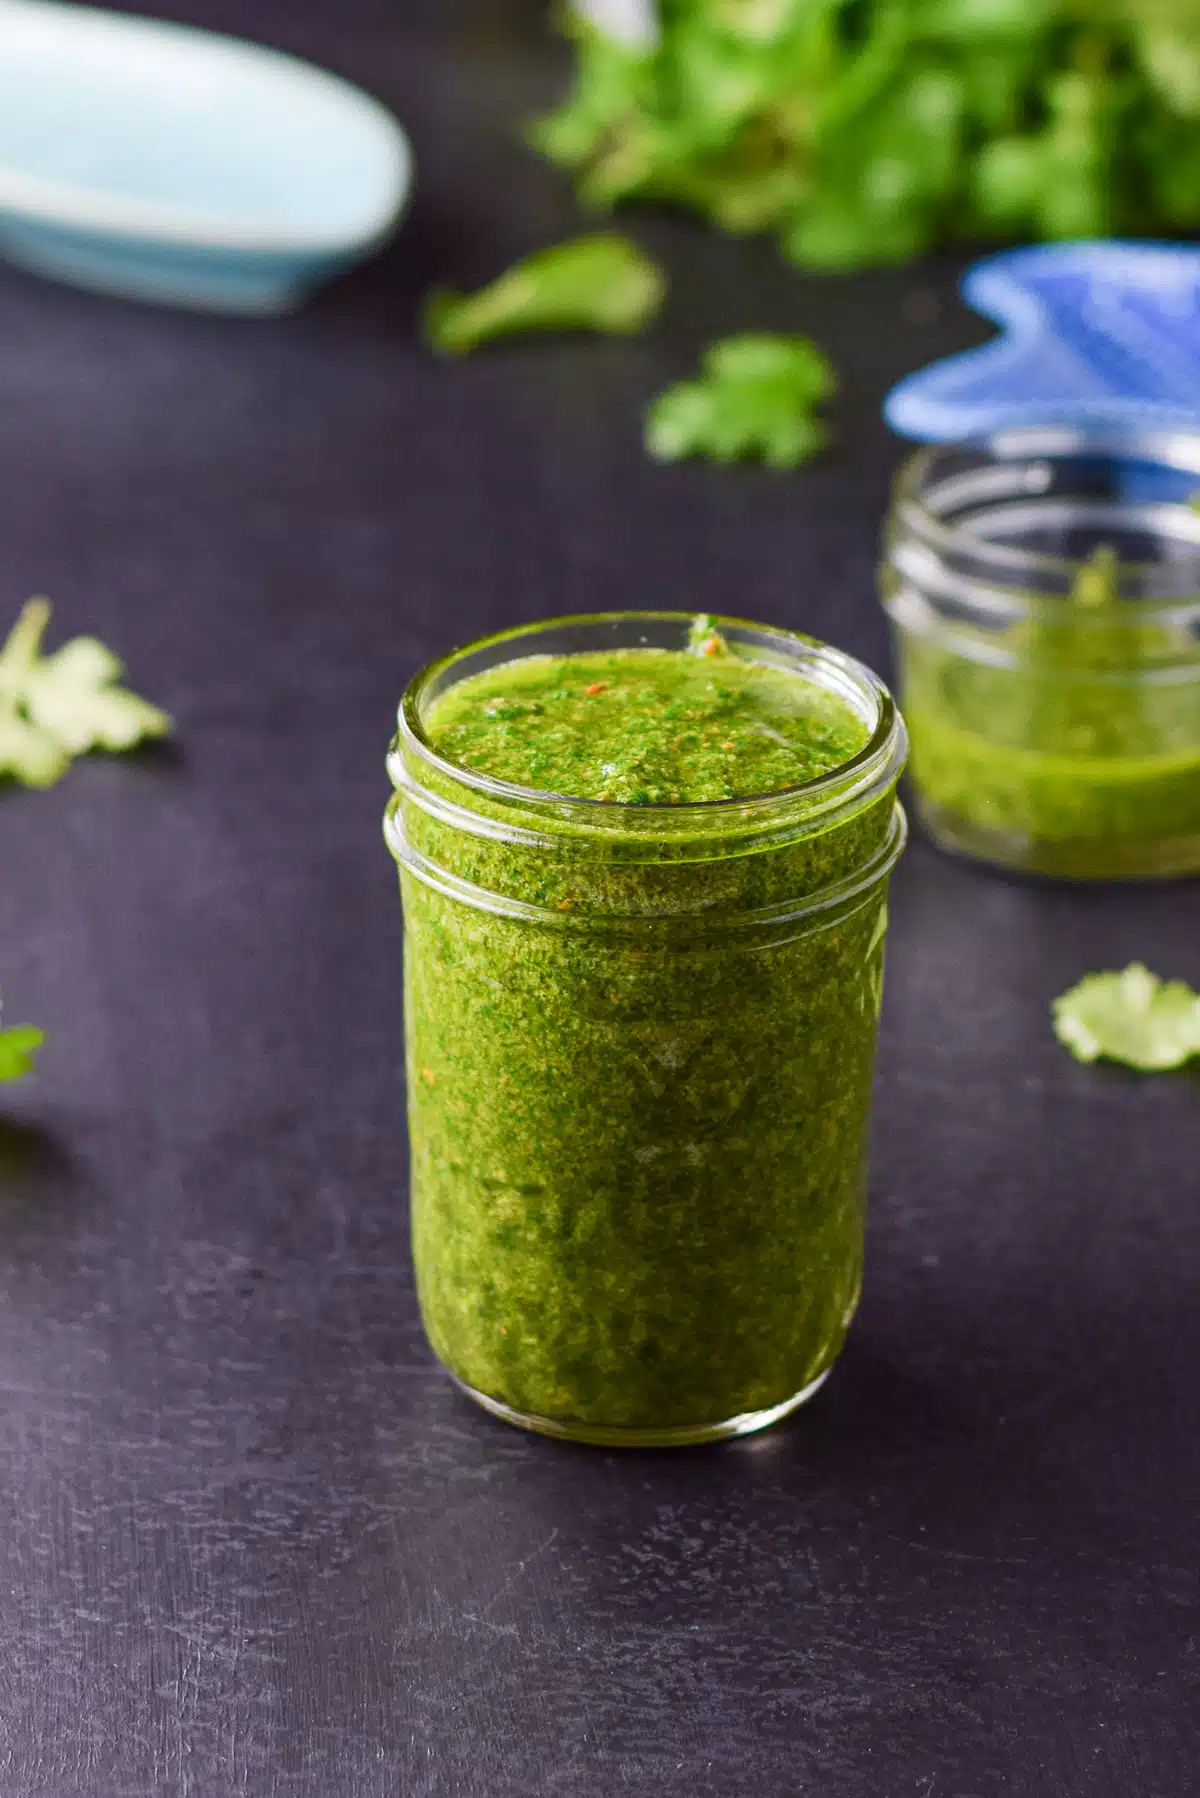 A ball jar full of chimichurri with parsley leaves in the background